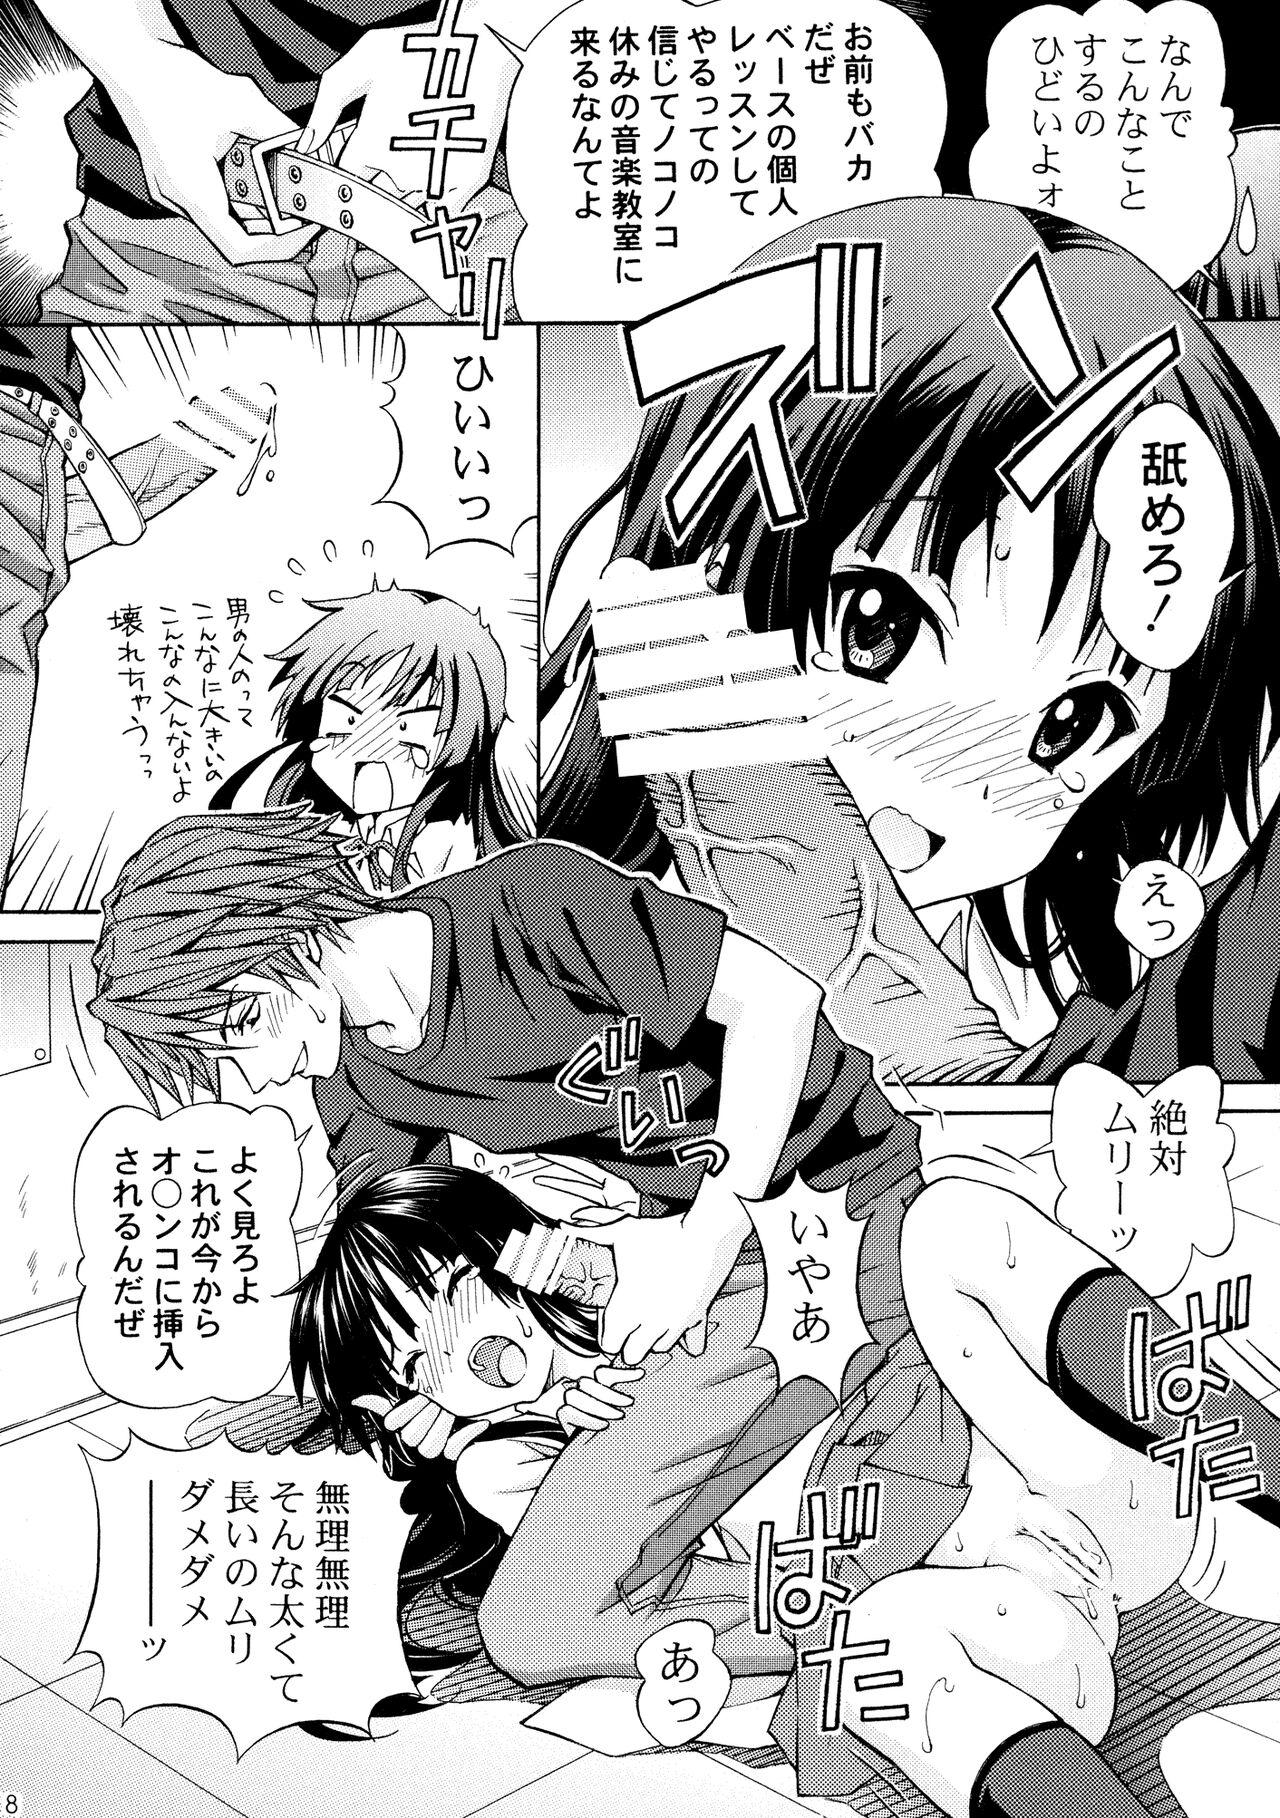 Indonesian Moe-on - K-on Sexteen - Page 8